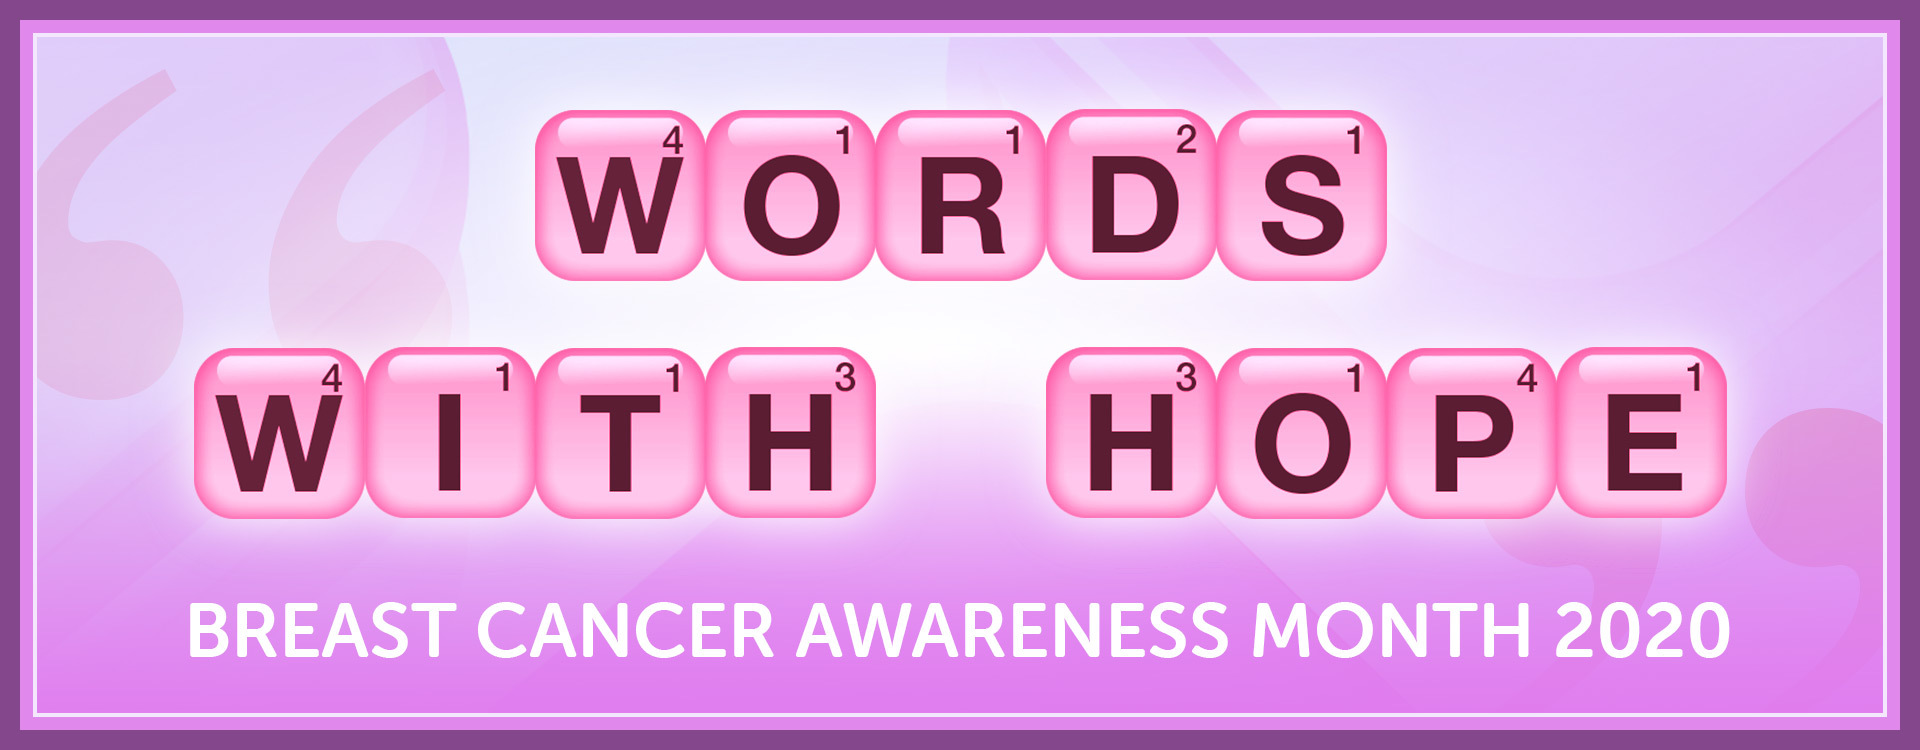 Words With Friends and the American Cancer Society Partner for Breast  Cancer Awareness Month with Social Initiative, #WordsWithHope